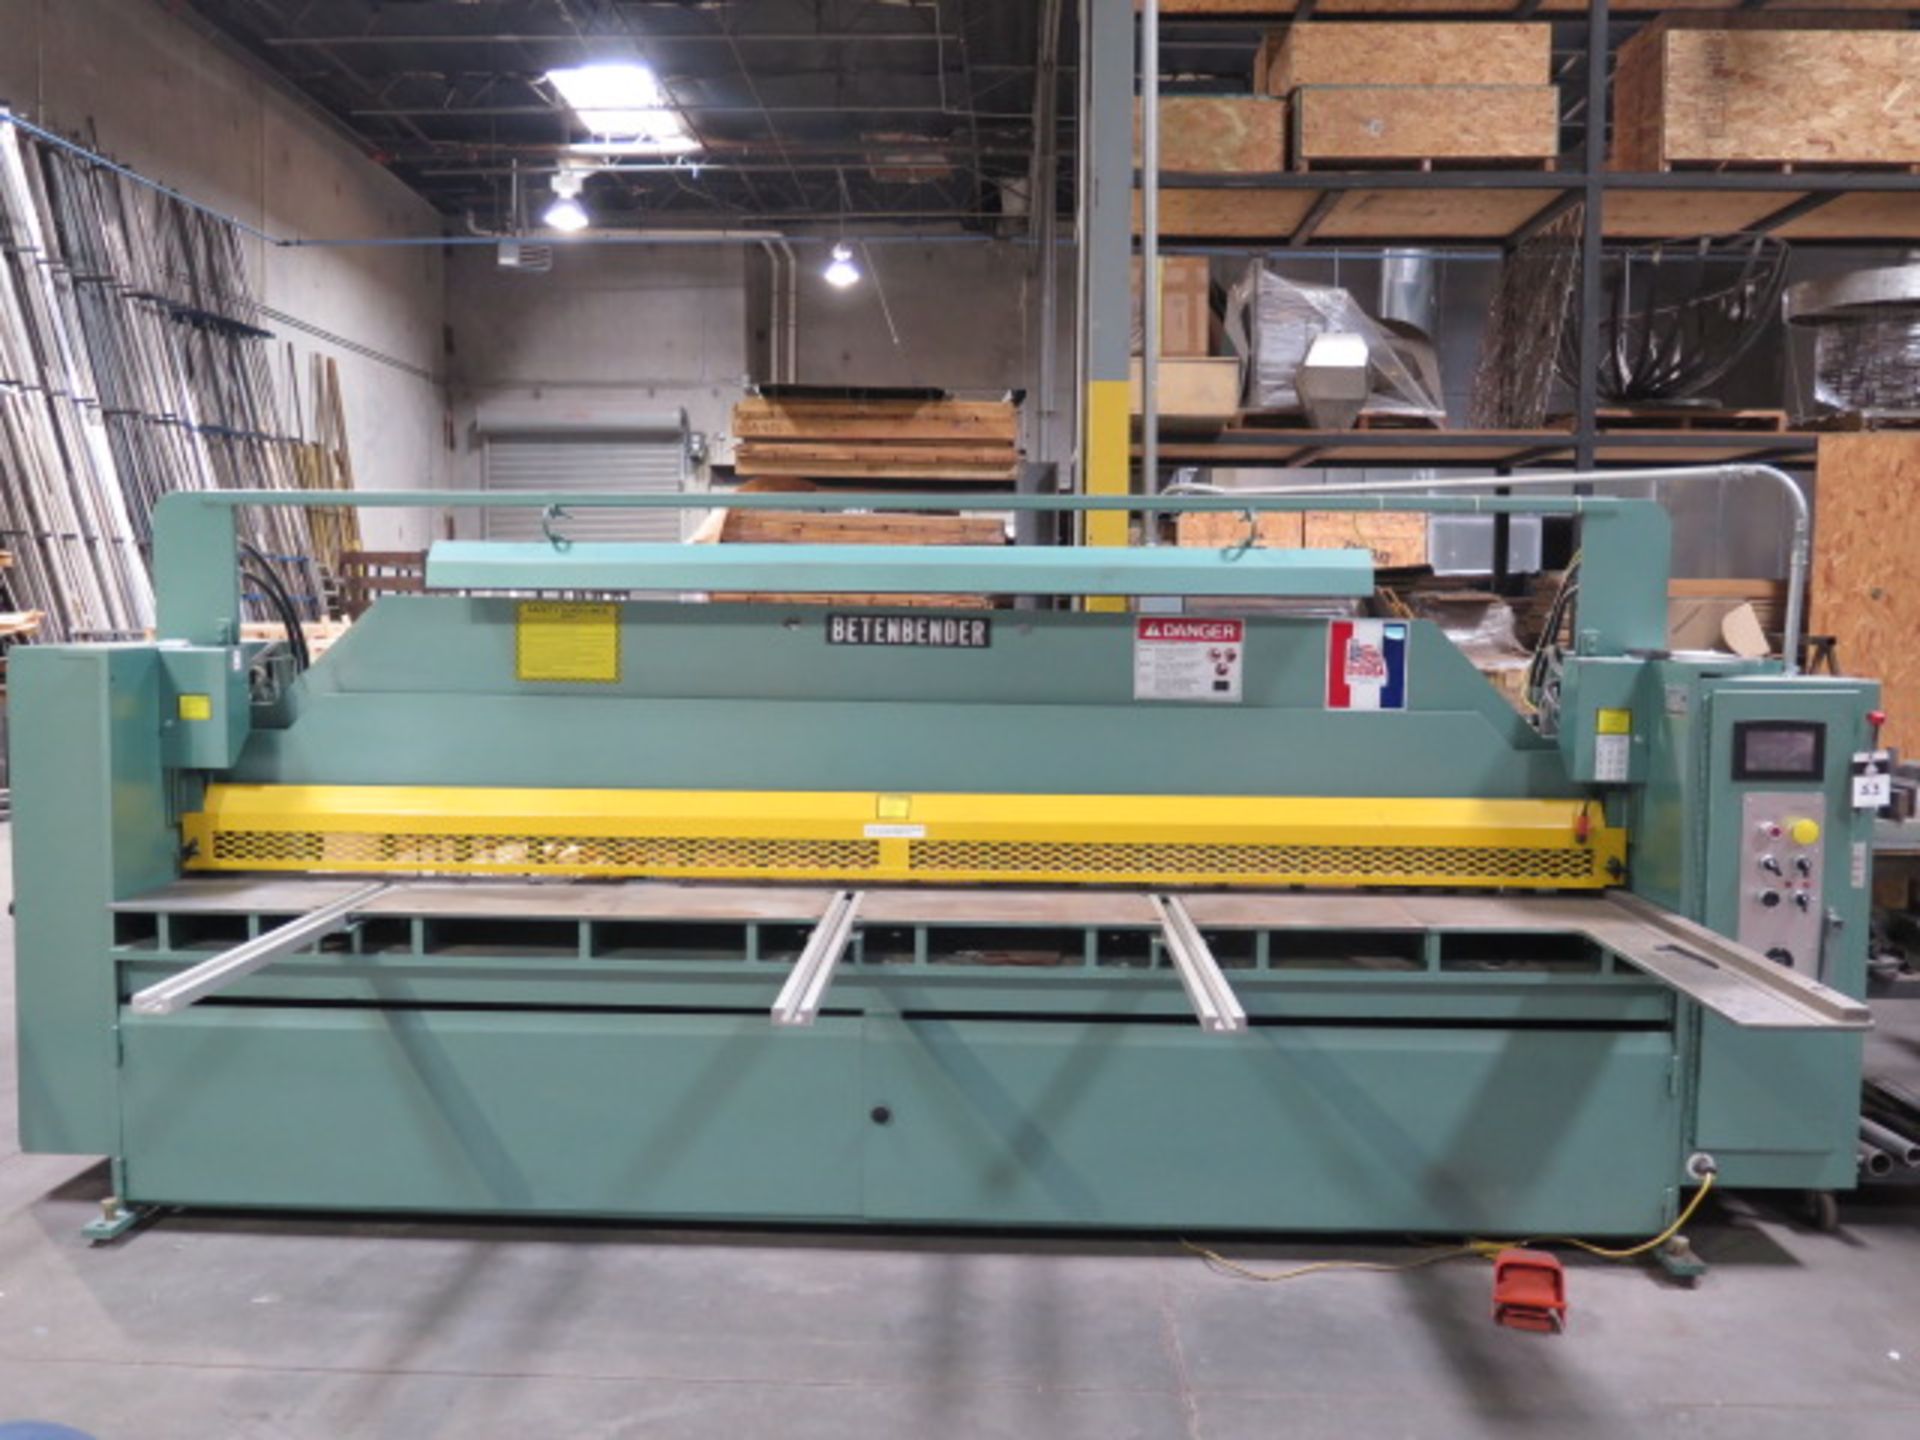 Betenbender mdl. 12-1/4 12’ X .25'' Power Shear s/n 262919 w/ PLC Controls, 53” Squaring, SOLD AS IS